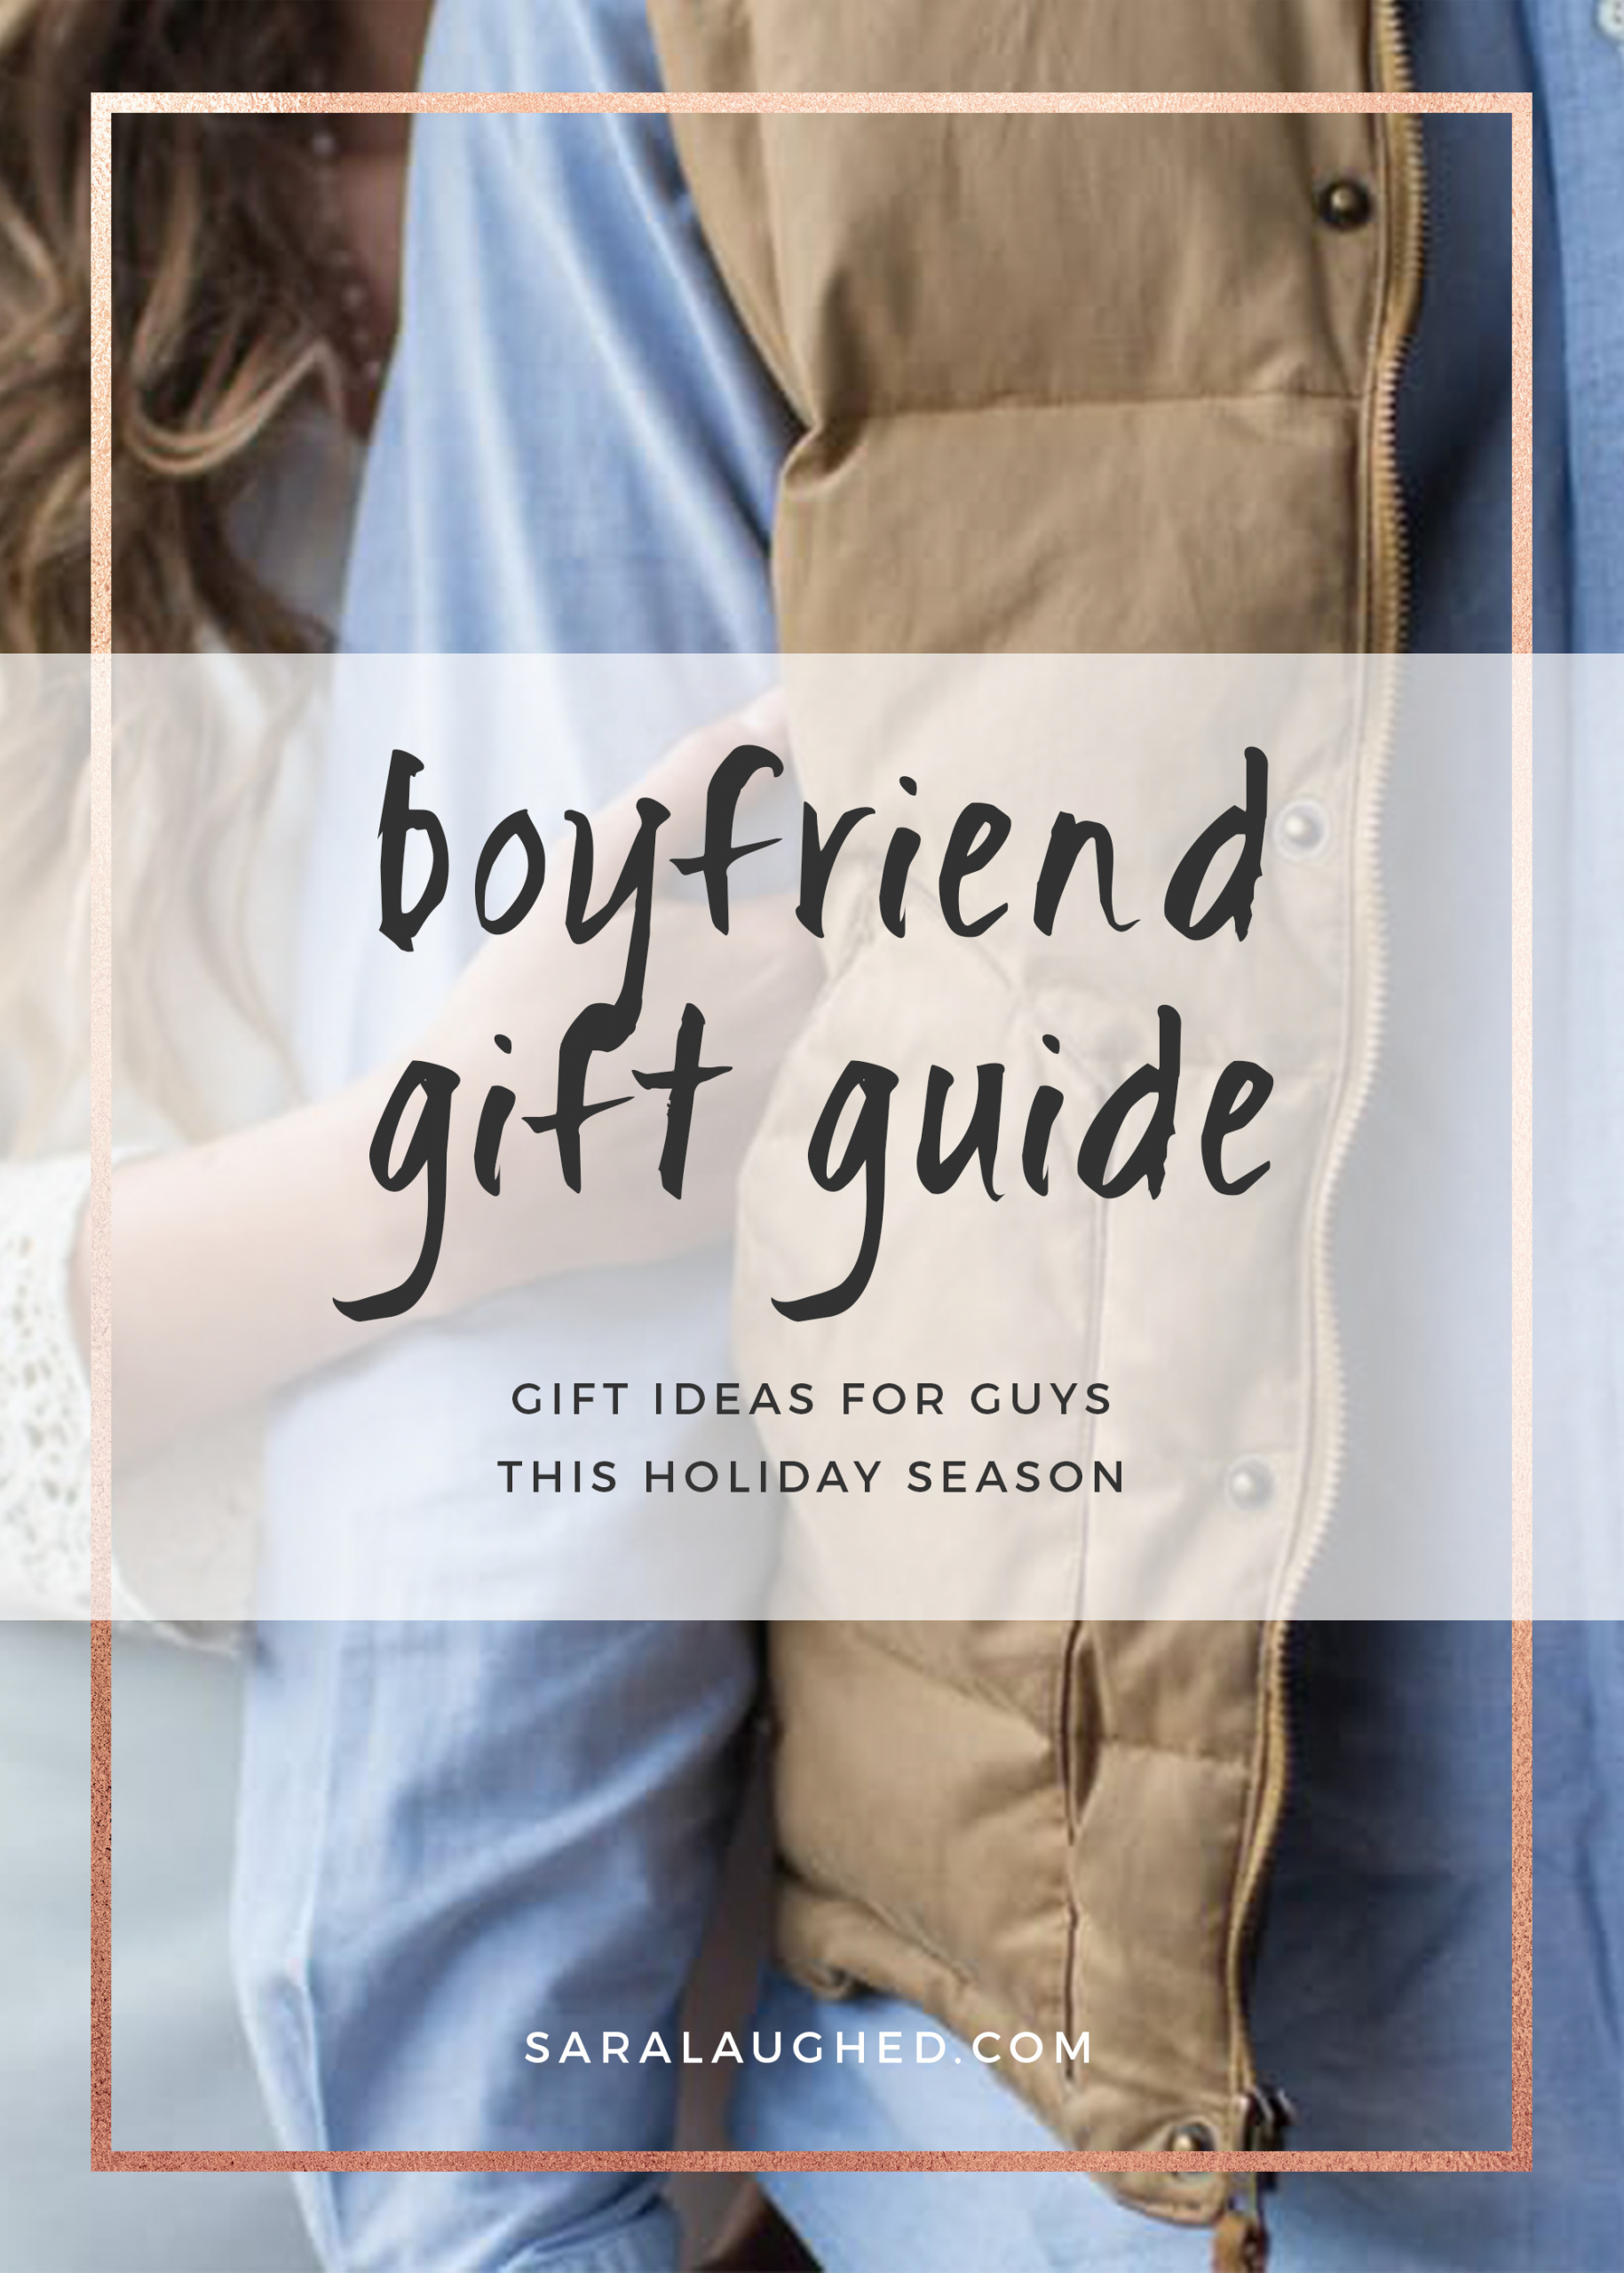 Great Gift Ideas For Boyfriend
 Gift Ideas for Guys What to Get Your Boyfriend for